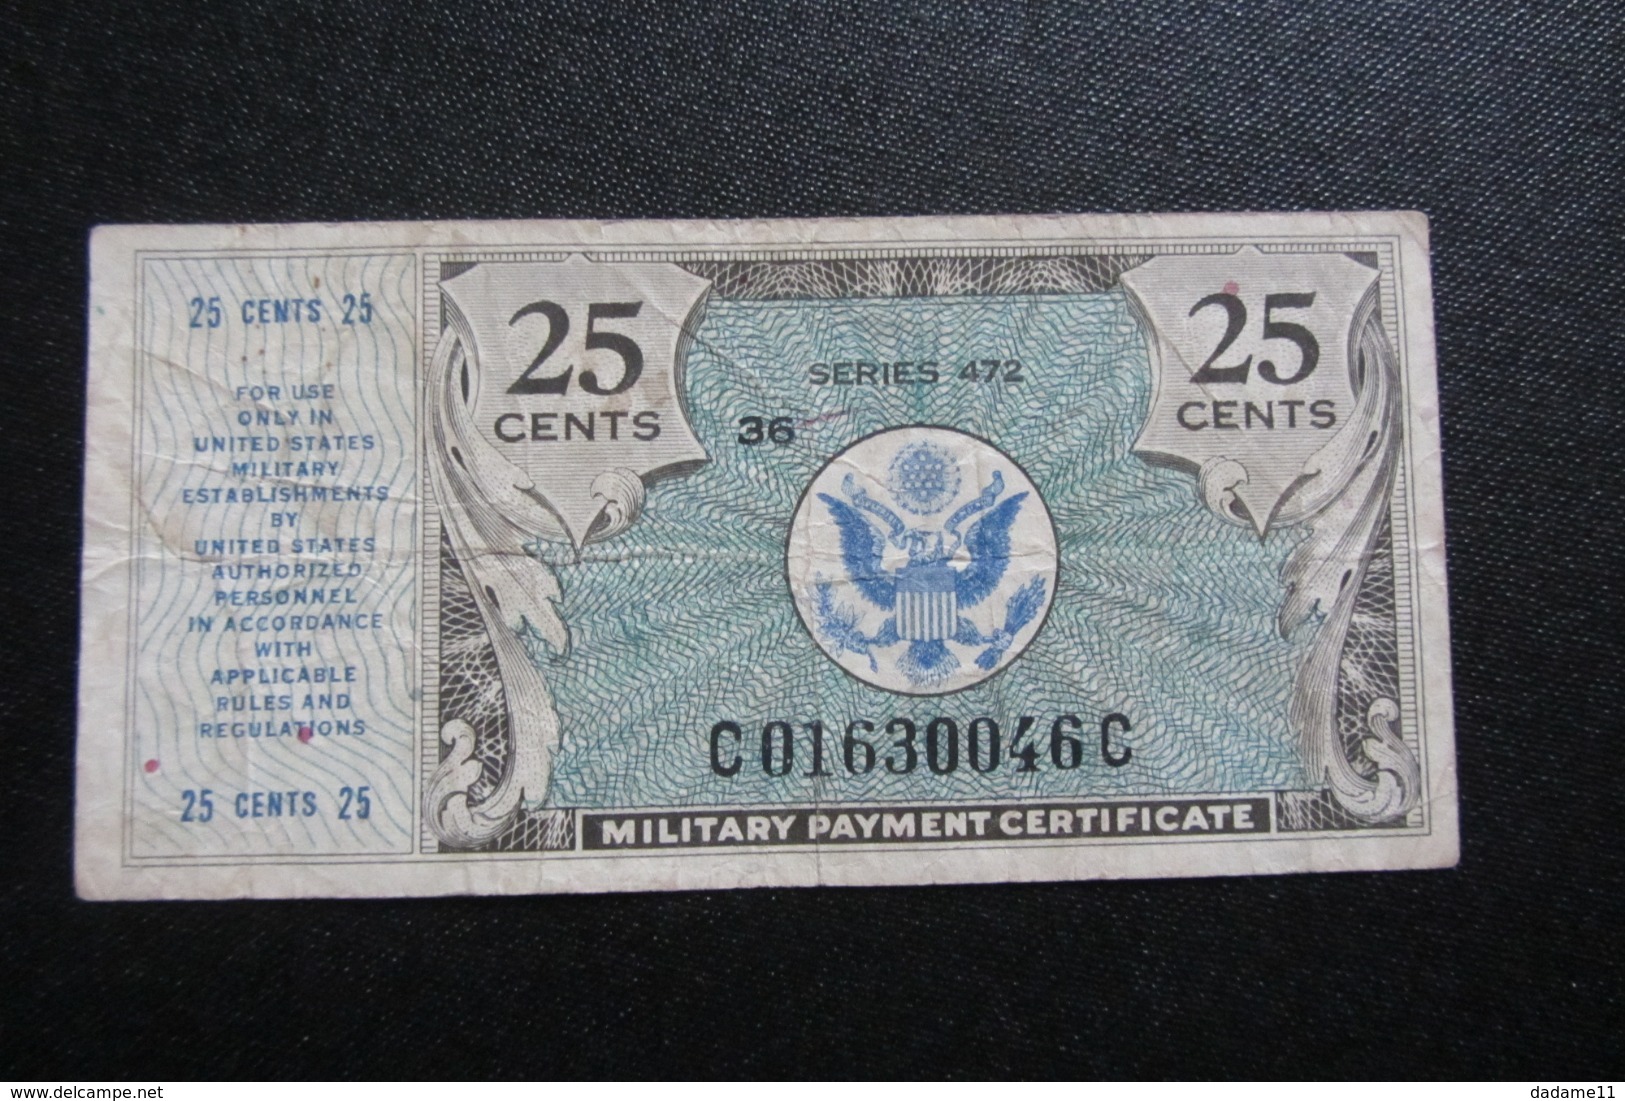 25 Cents Military Payement - Unidentified